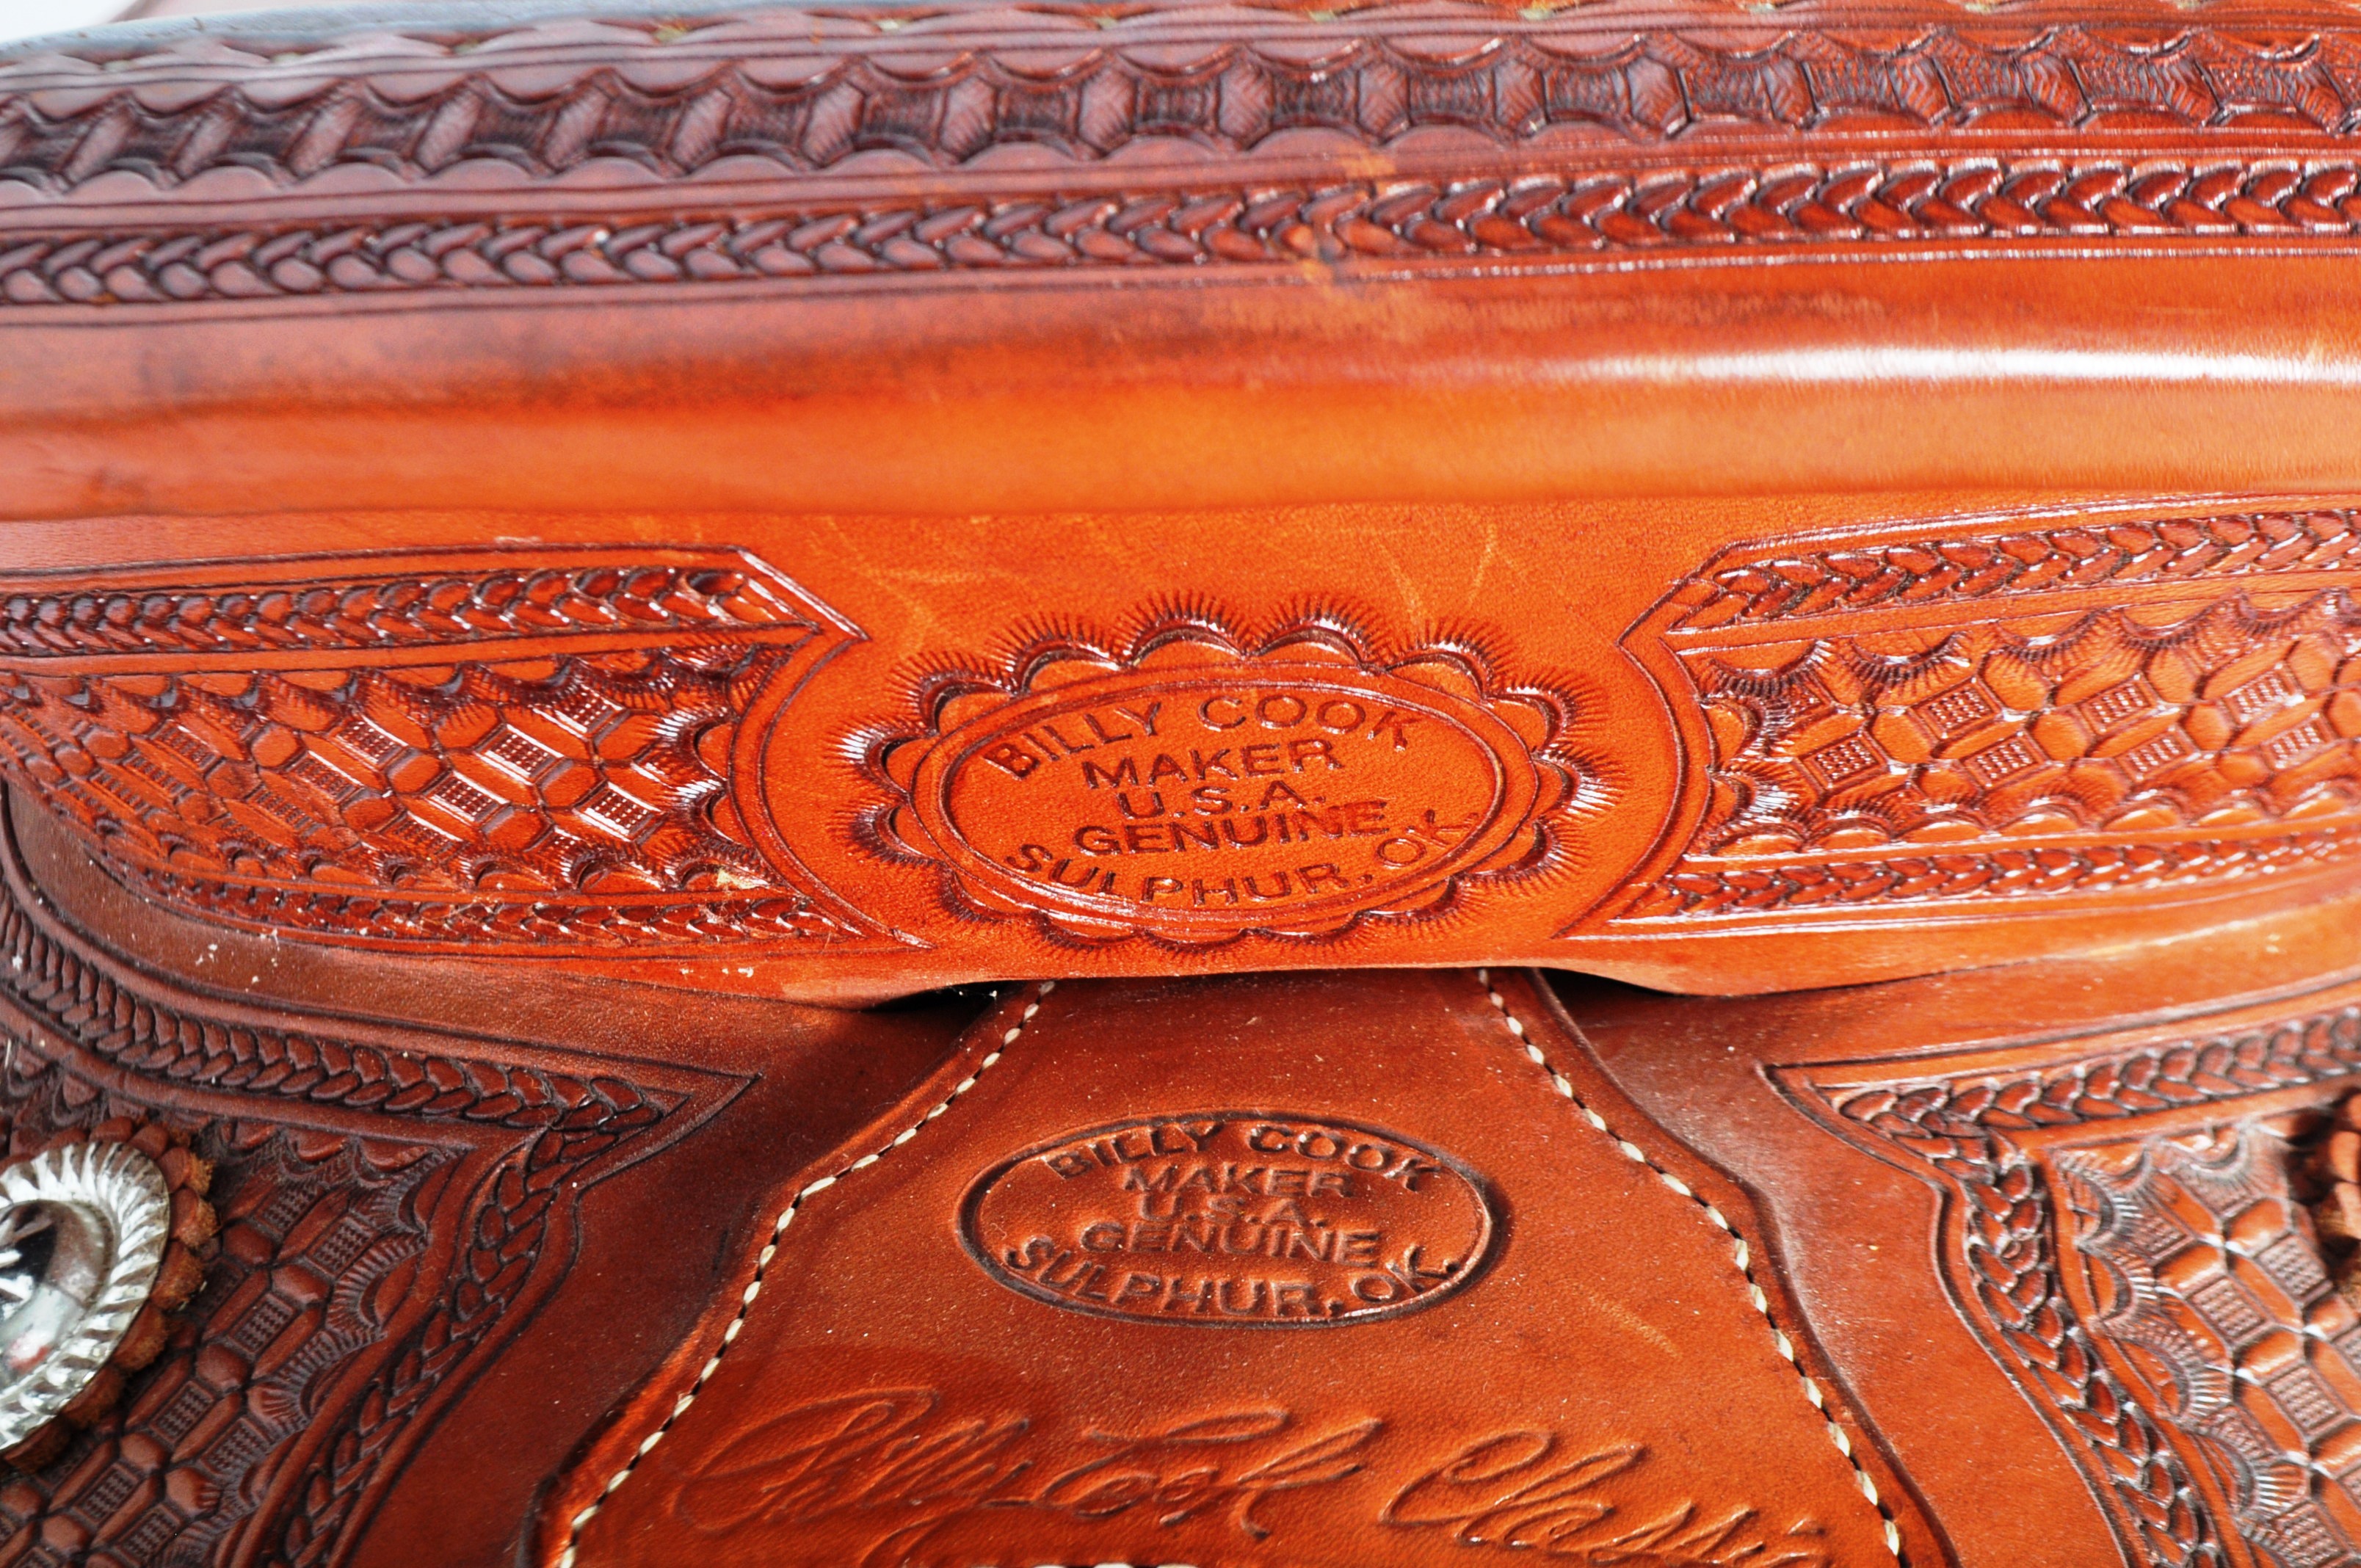 BILLY COOK HIGH QUALITY LEATHER SADDLE - Image 6 of 11